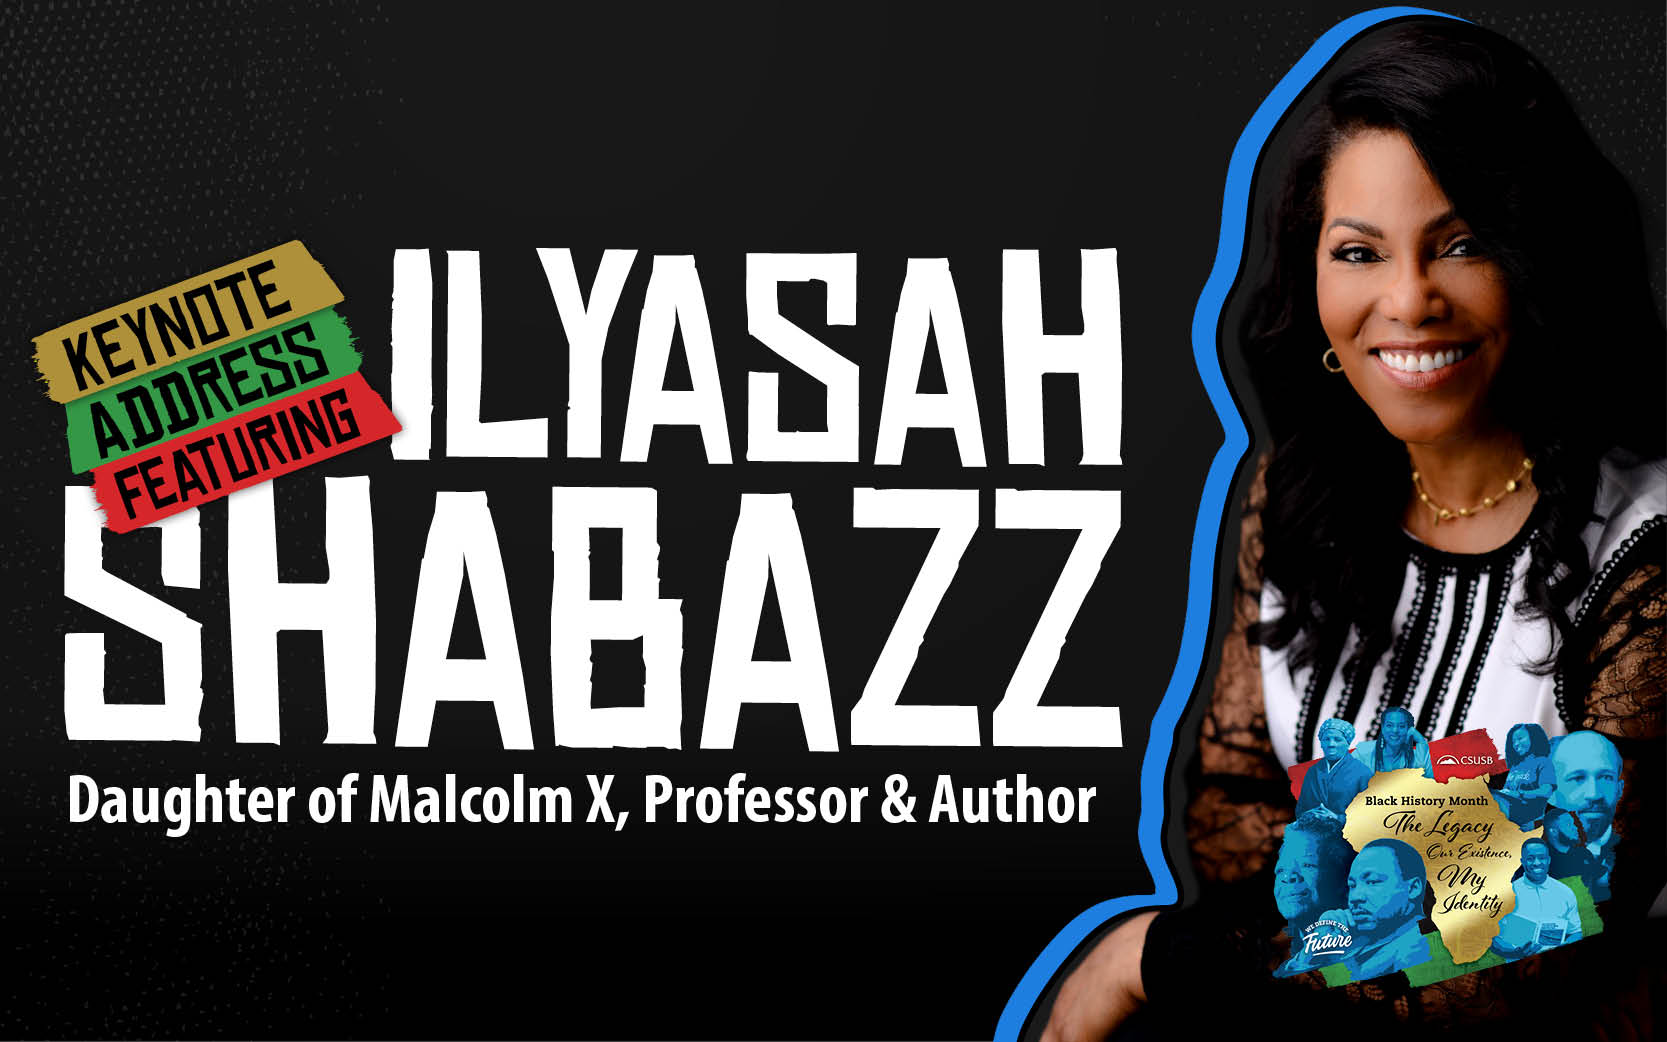 Keynote Address Featuring Ilyasah Shabazz: Daughter of Malcolm X, Professor & Author Black History Month: The Legacy, Our Existence, My Identity